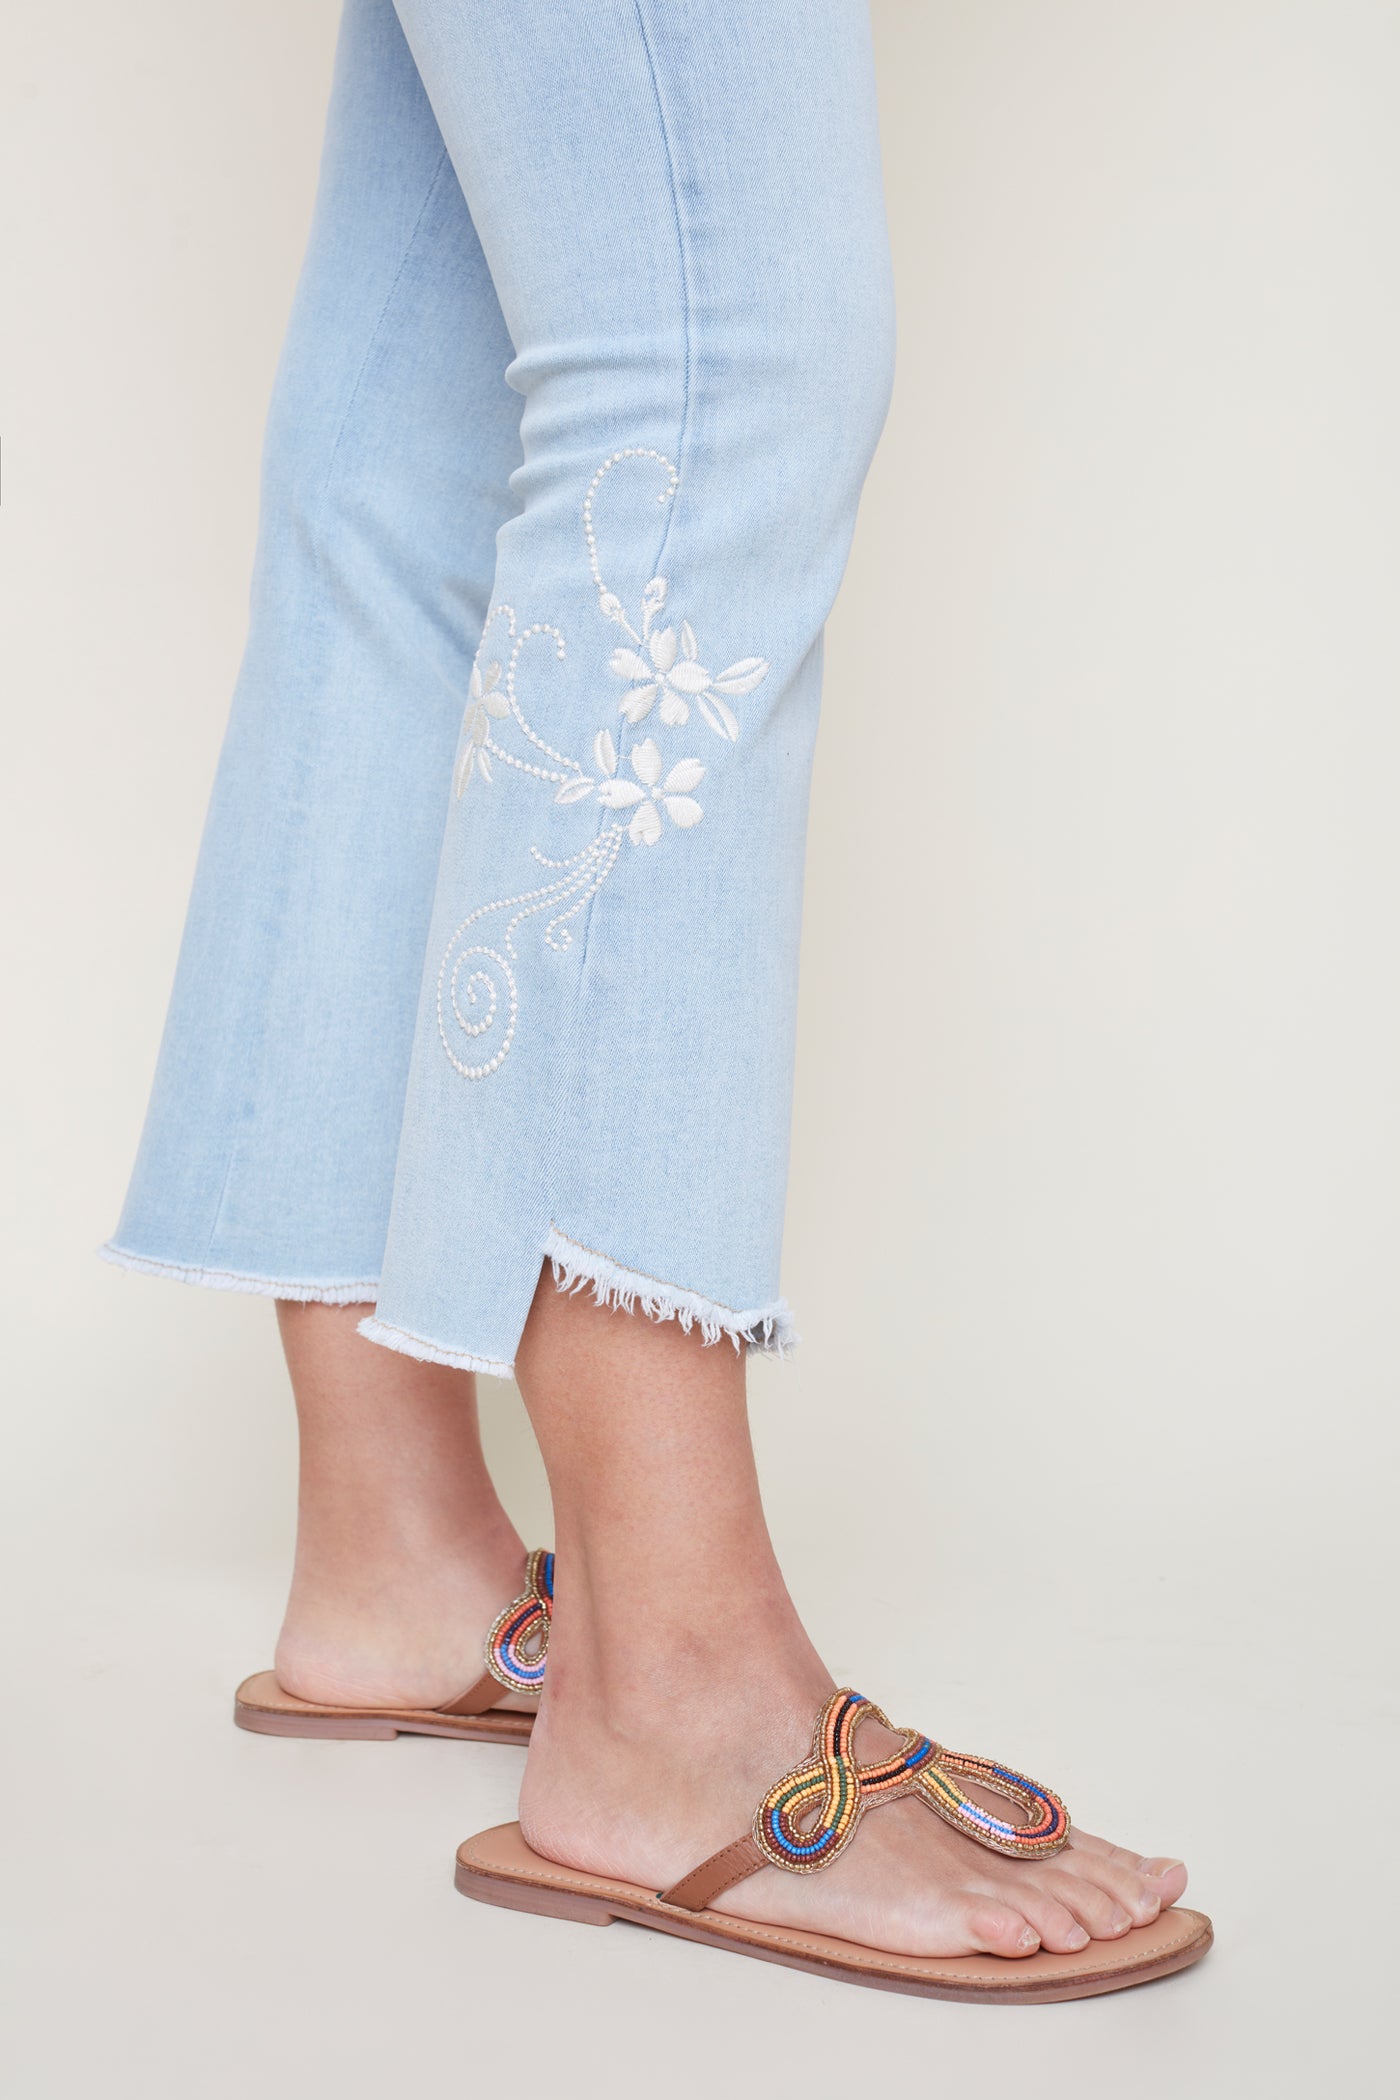 Cropped Flare Embroidered Jeans - Bleached Wash